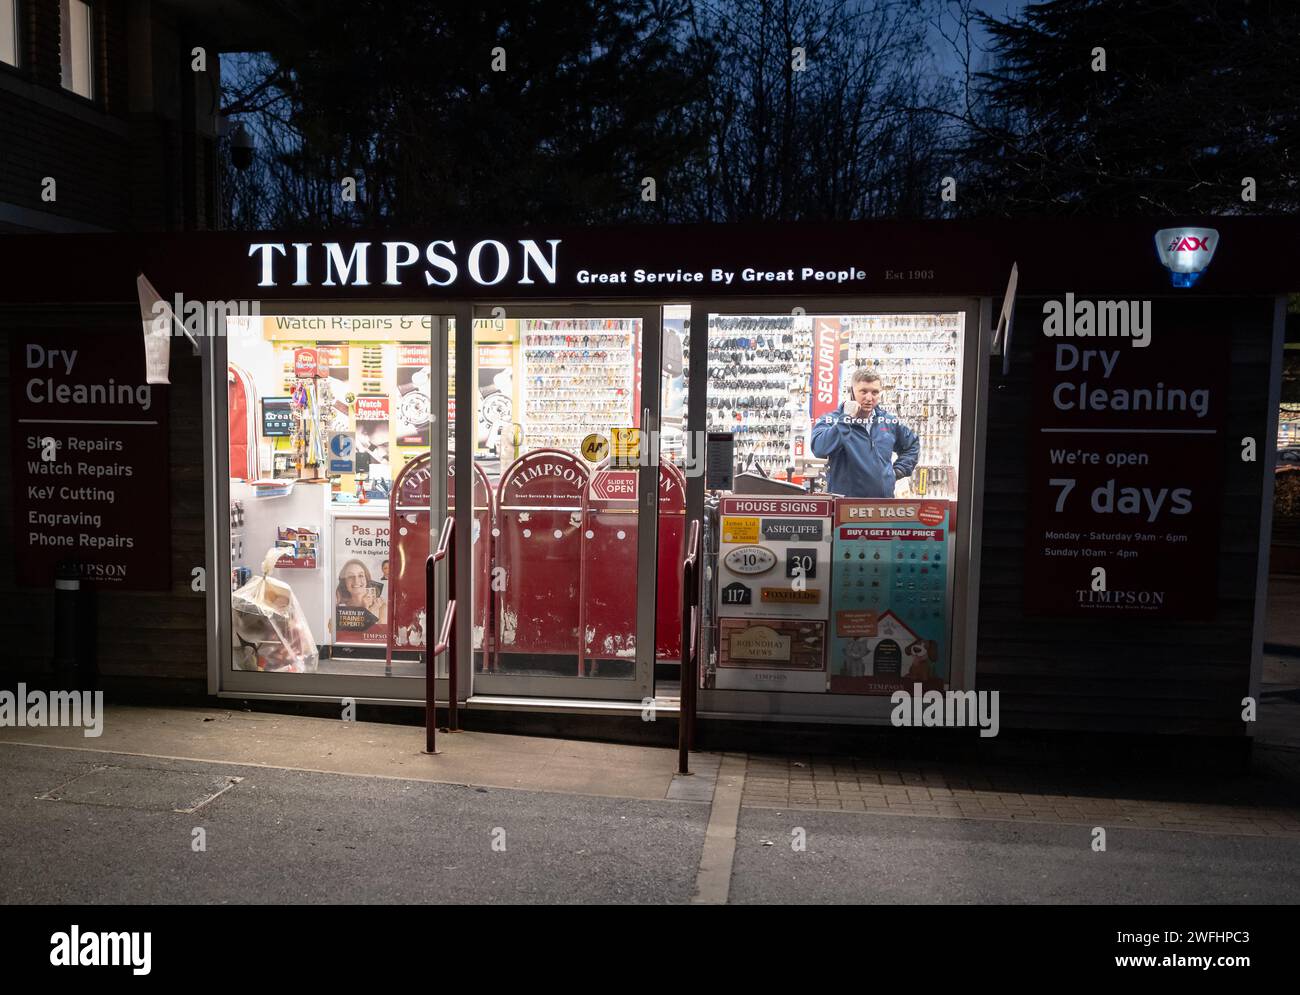 Torquay. Timpson shoes and watch repair and key cutting shop with the cobbler inside on the phone. Night time photograph with shop lit up in the dark. Stock Photo